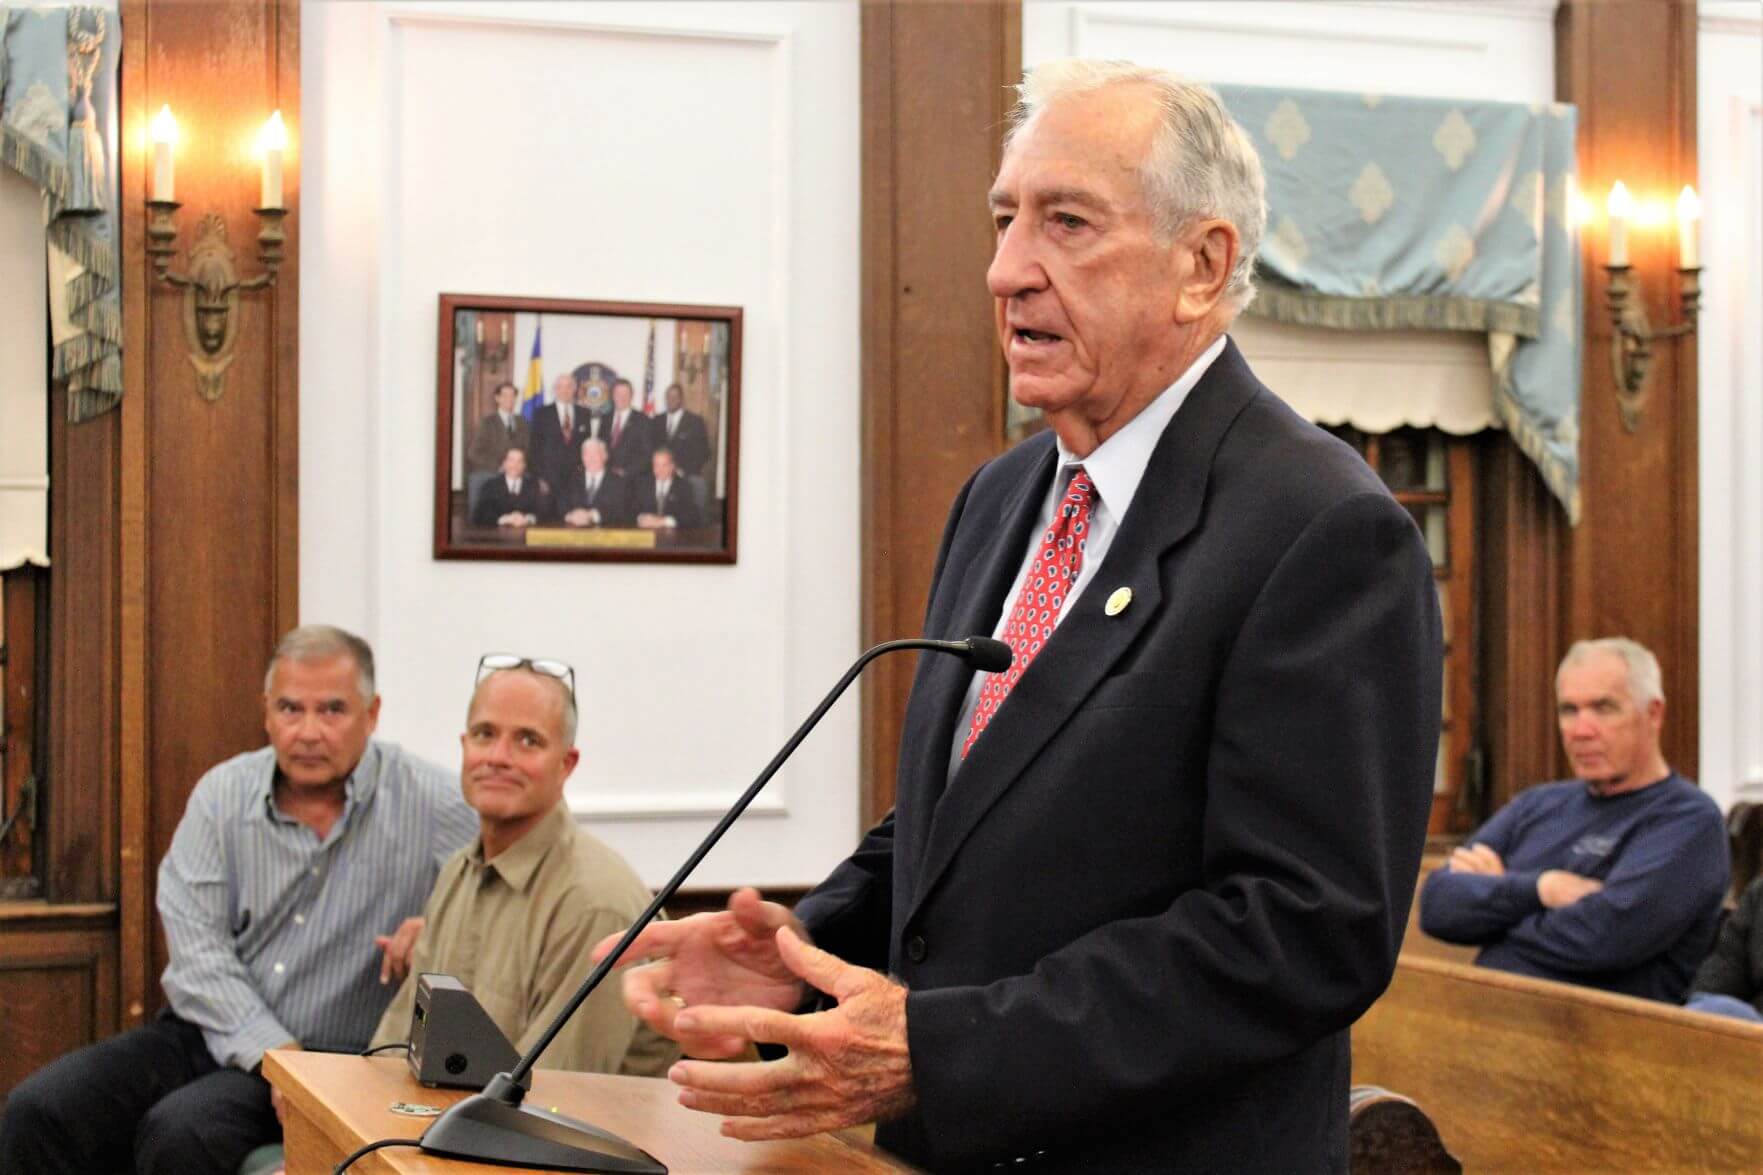 Former U.S. Rep. and Ambassador to Panama William J. Hughes addresses Ocean City Council in file photo. He died Oct. 30